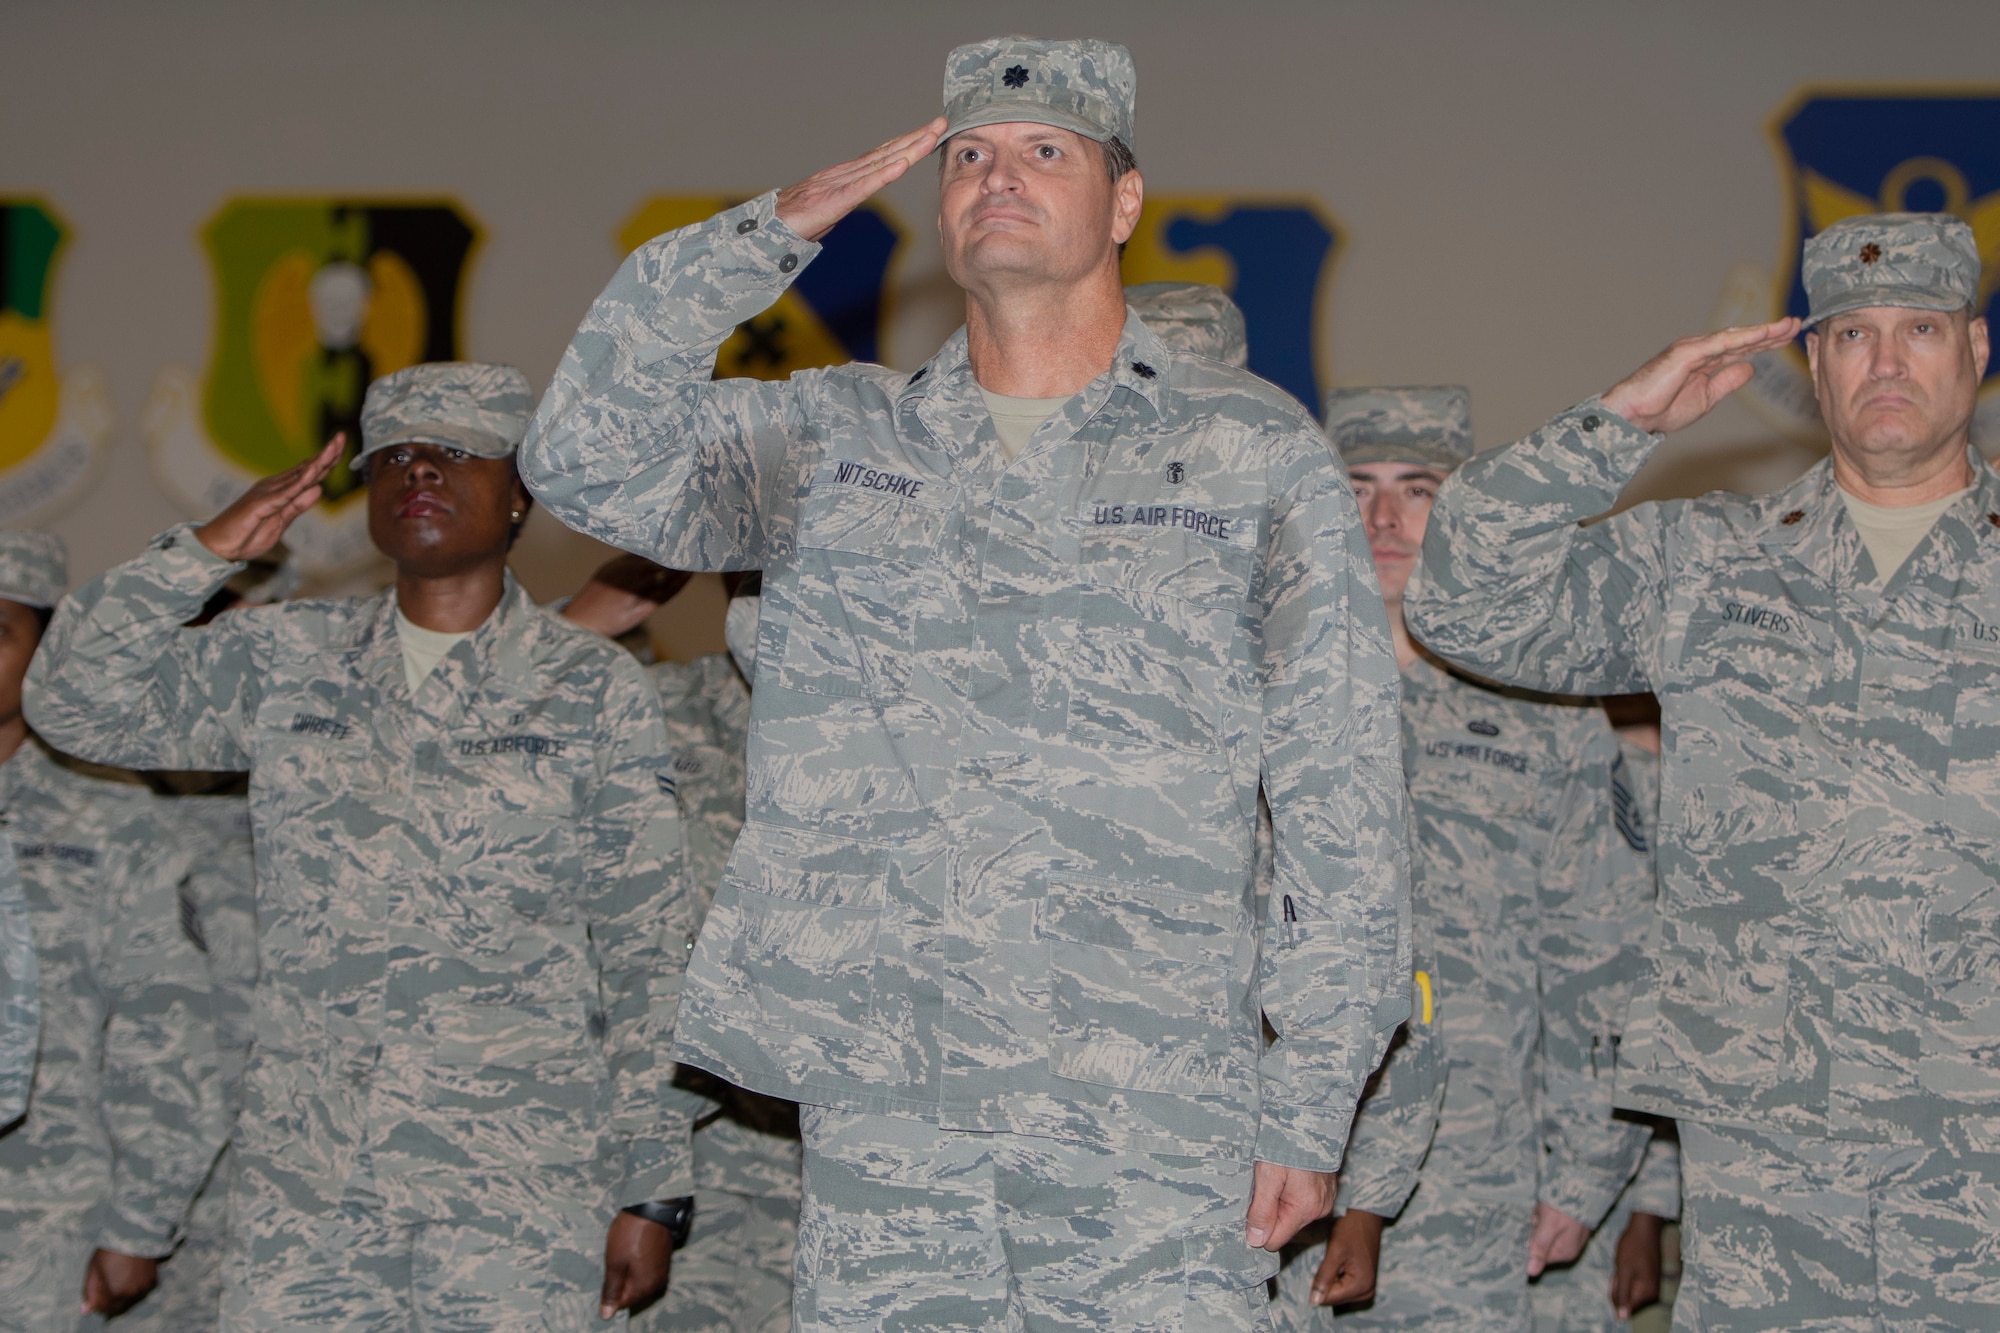 U.S. Air Force Col. Dennis Britten took command of the 307th Medical Squadron during a ceremony at Barksdale Air Force Base, Louisiana, September 7, 2019. Britten has been assigned to the 307th MDS and it's predecessor, the 917th MDS, since he commissioned in 2019. The 307th Medical Squadron provides the medical care the Reserve Citizen Airmen of the 307th Bomb Wing require to be "fit to fight."